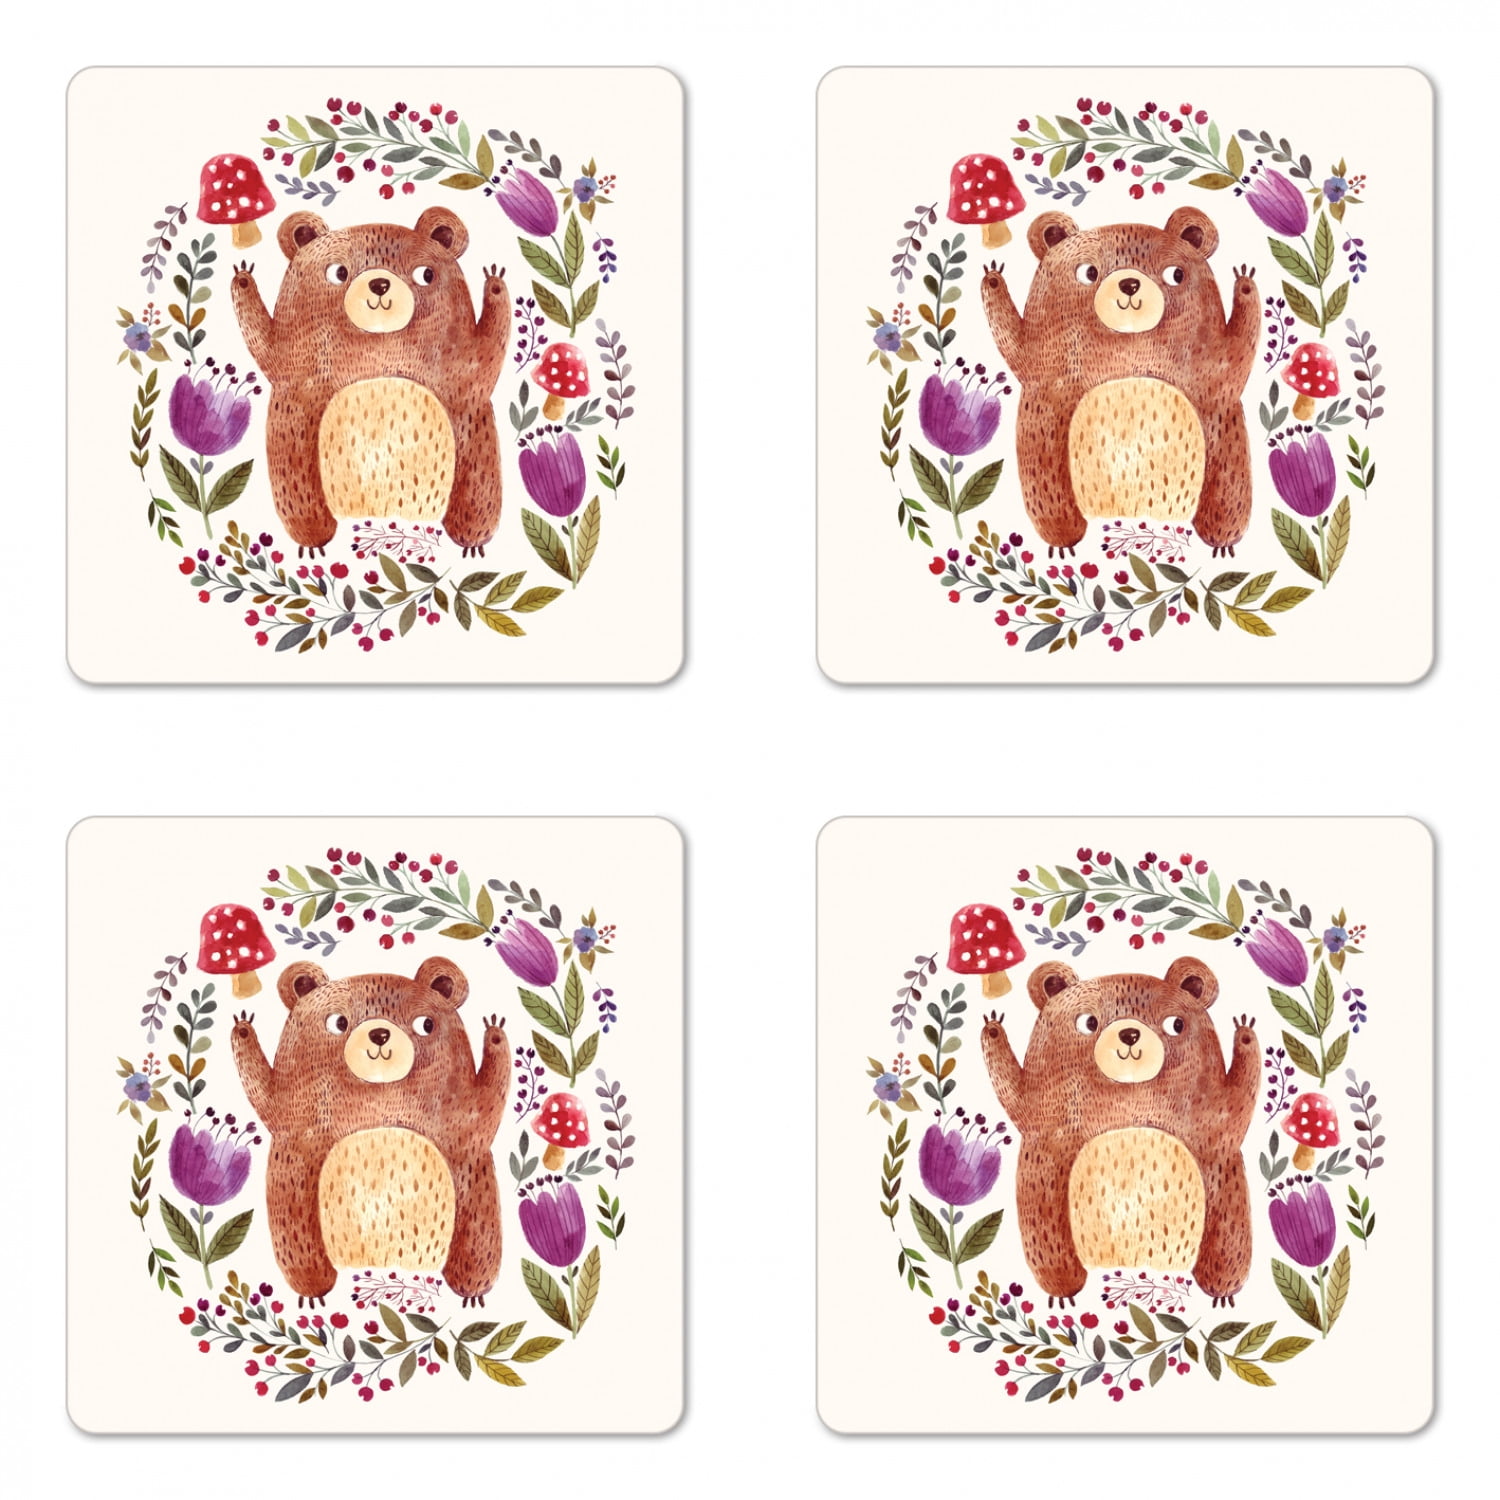 Cute Little Kitten Surrounded By Bubbles Set of 4 Coasters 